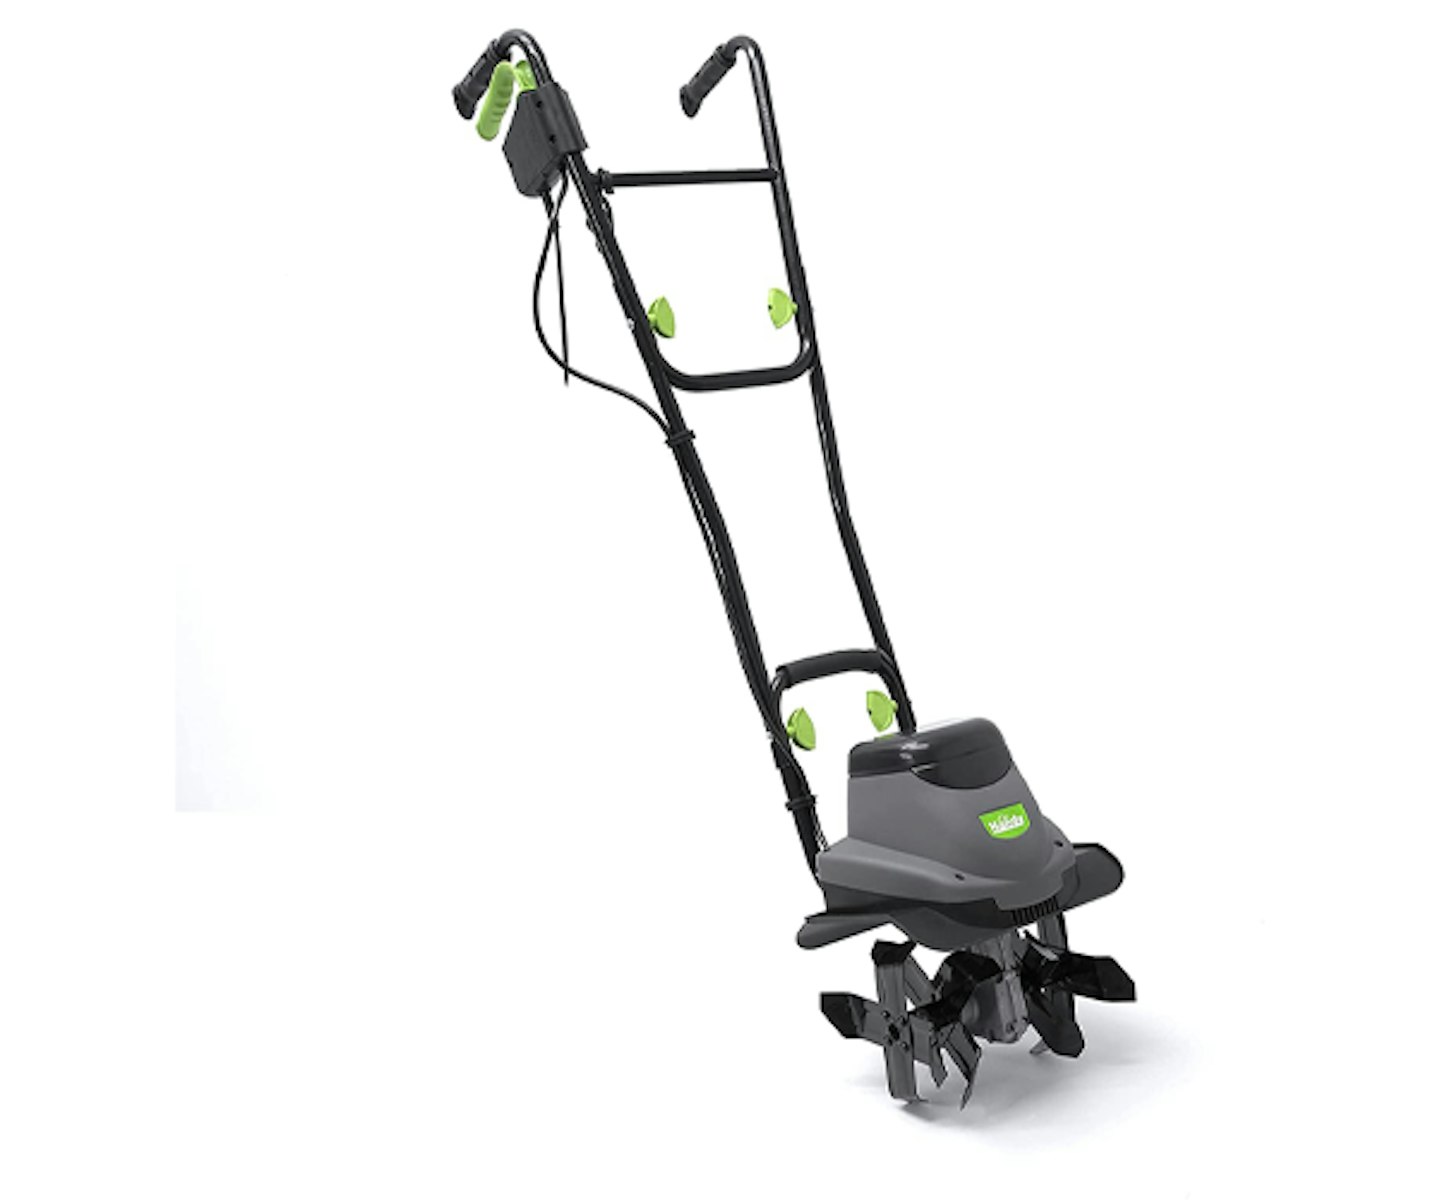 The Handy THET Electric Compact Tiller